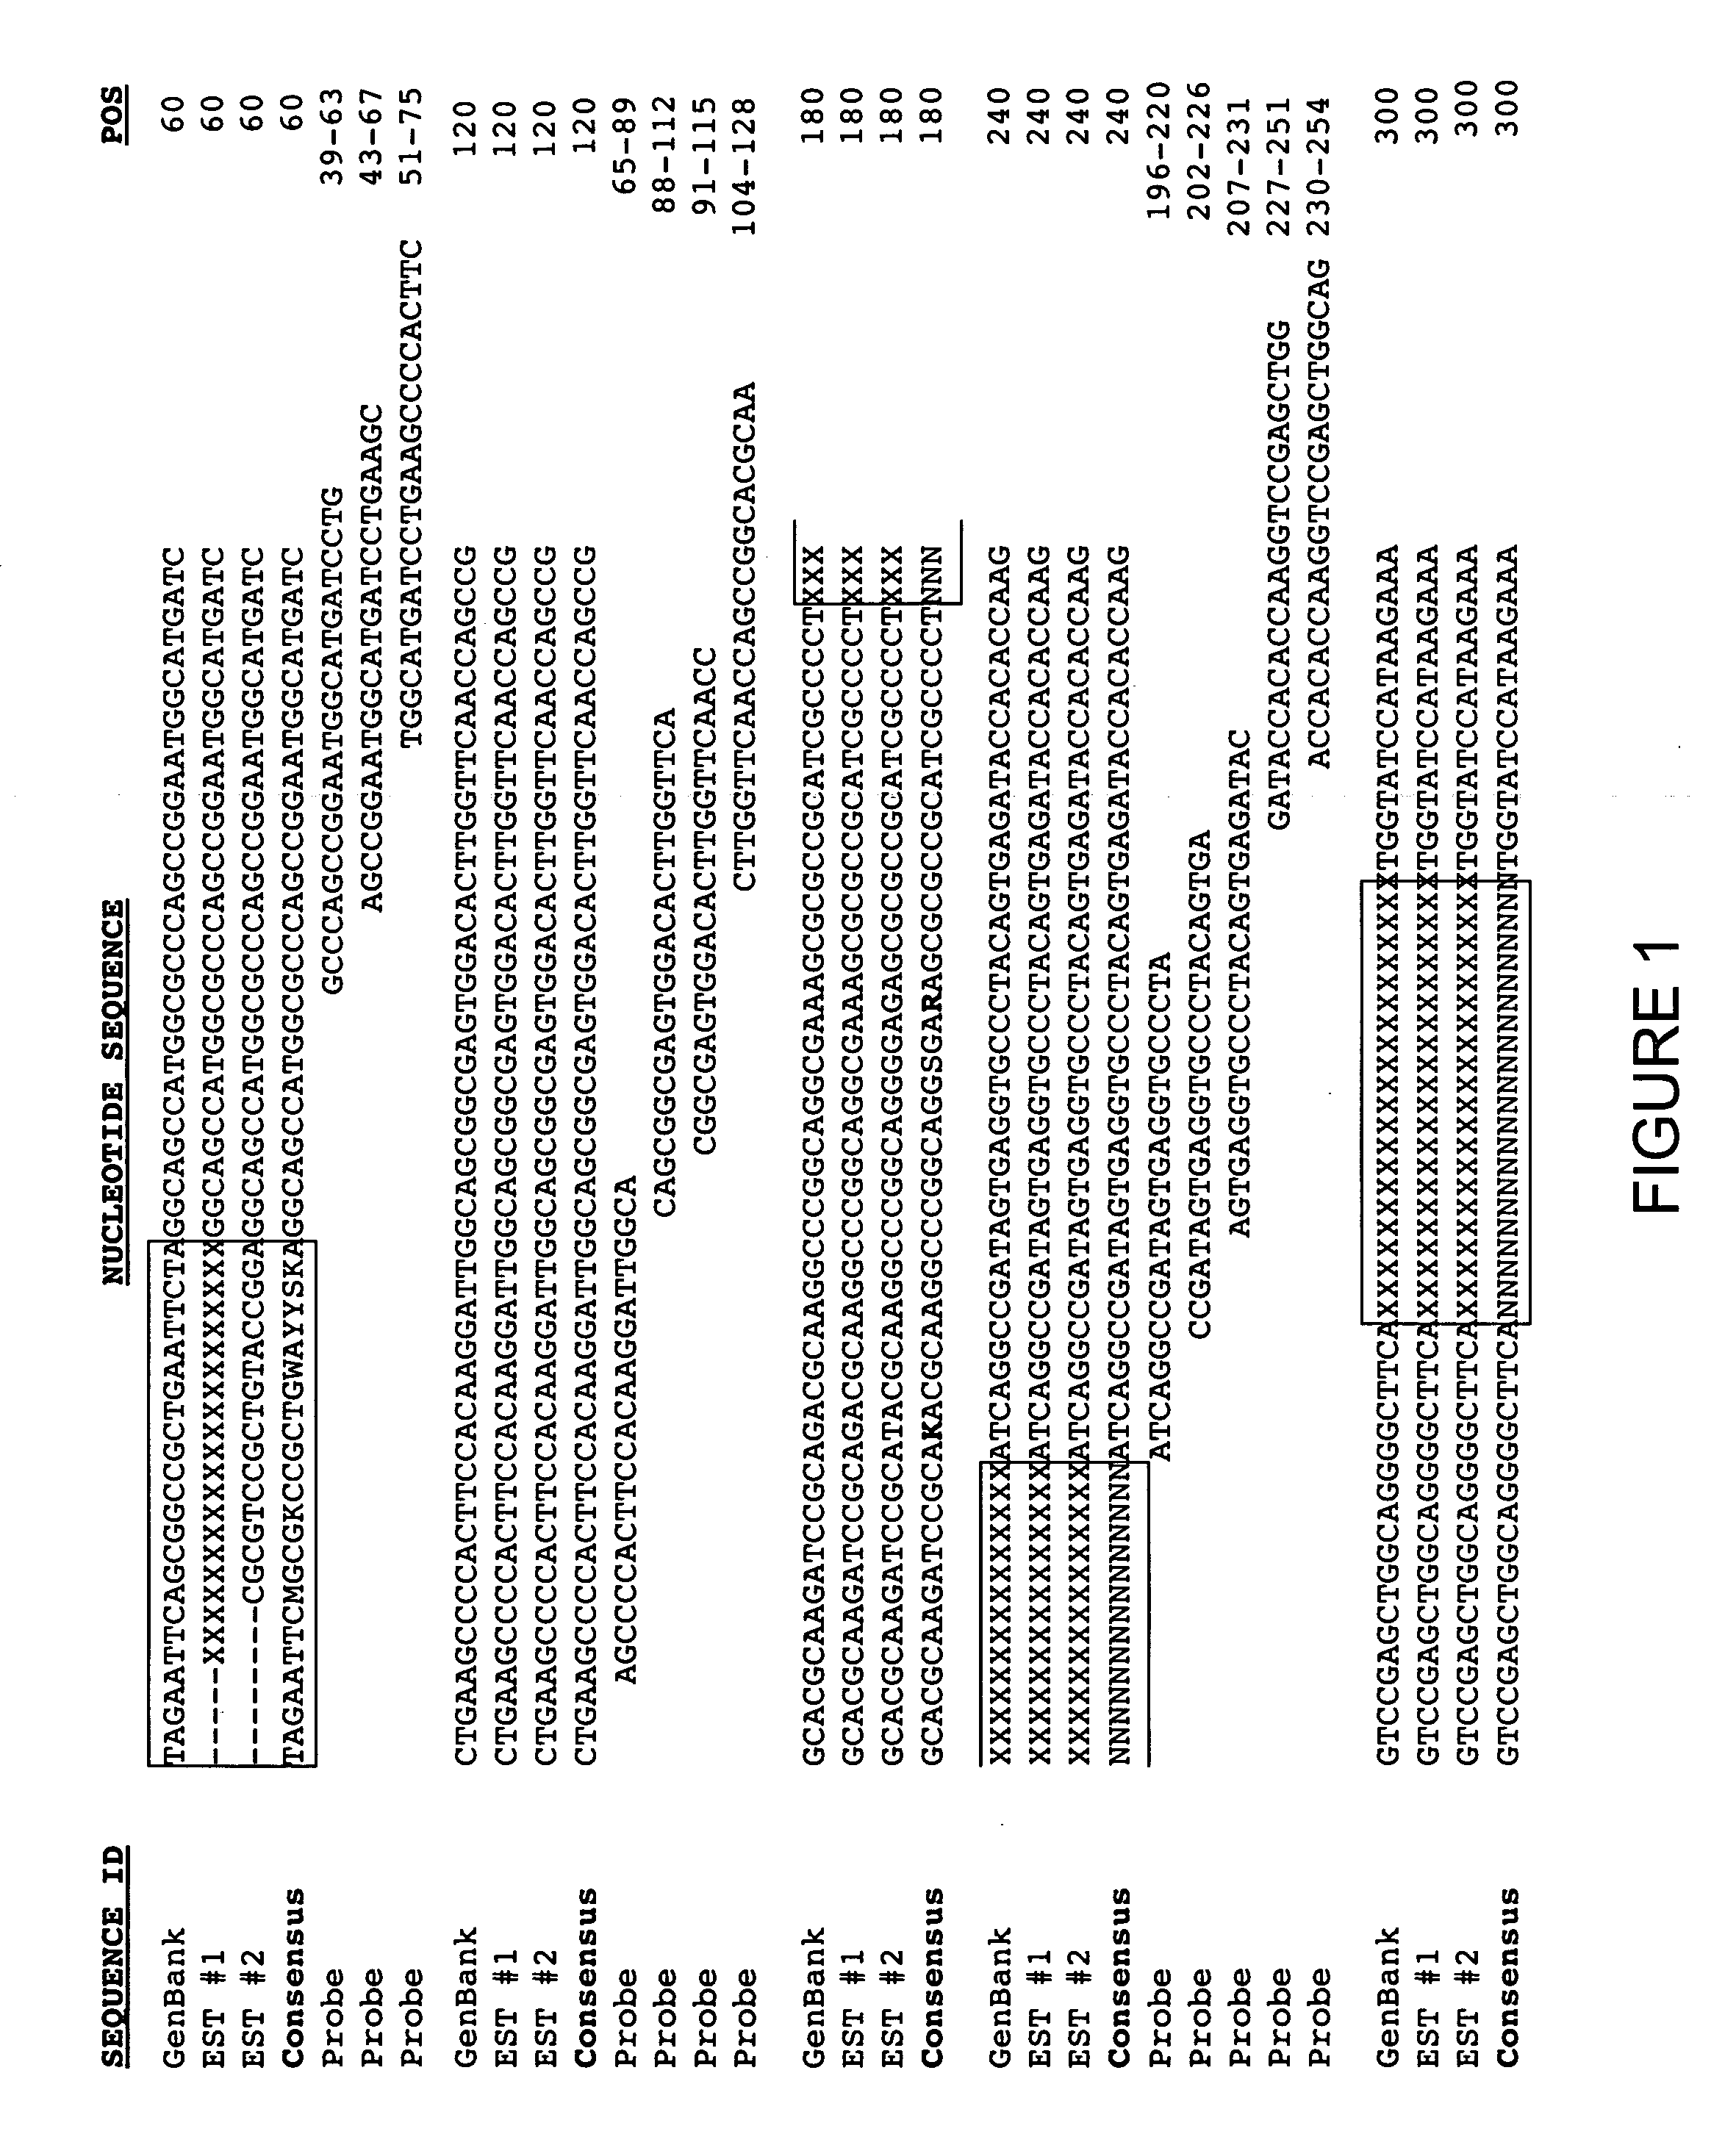 Oligonucleotide arrays to monitor gene expression and methods for making and using same